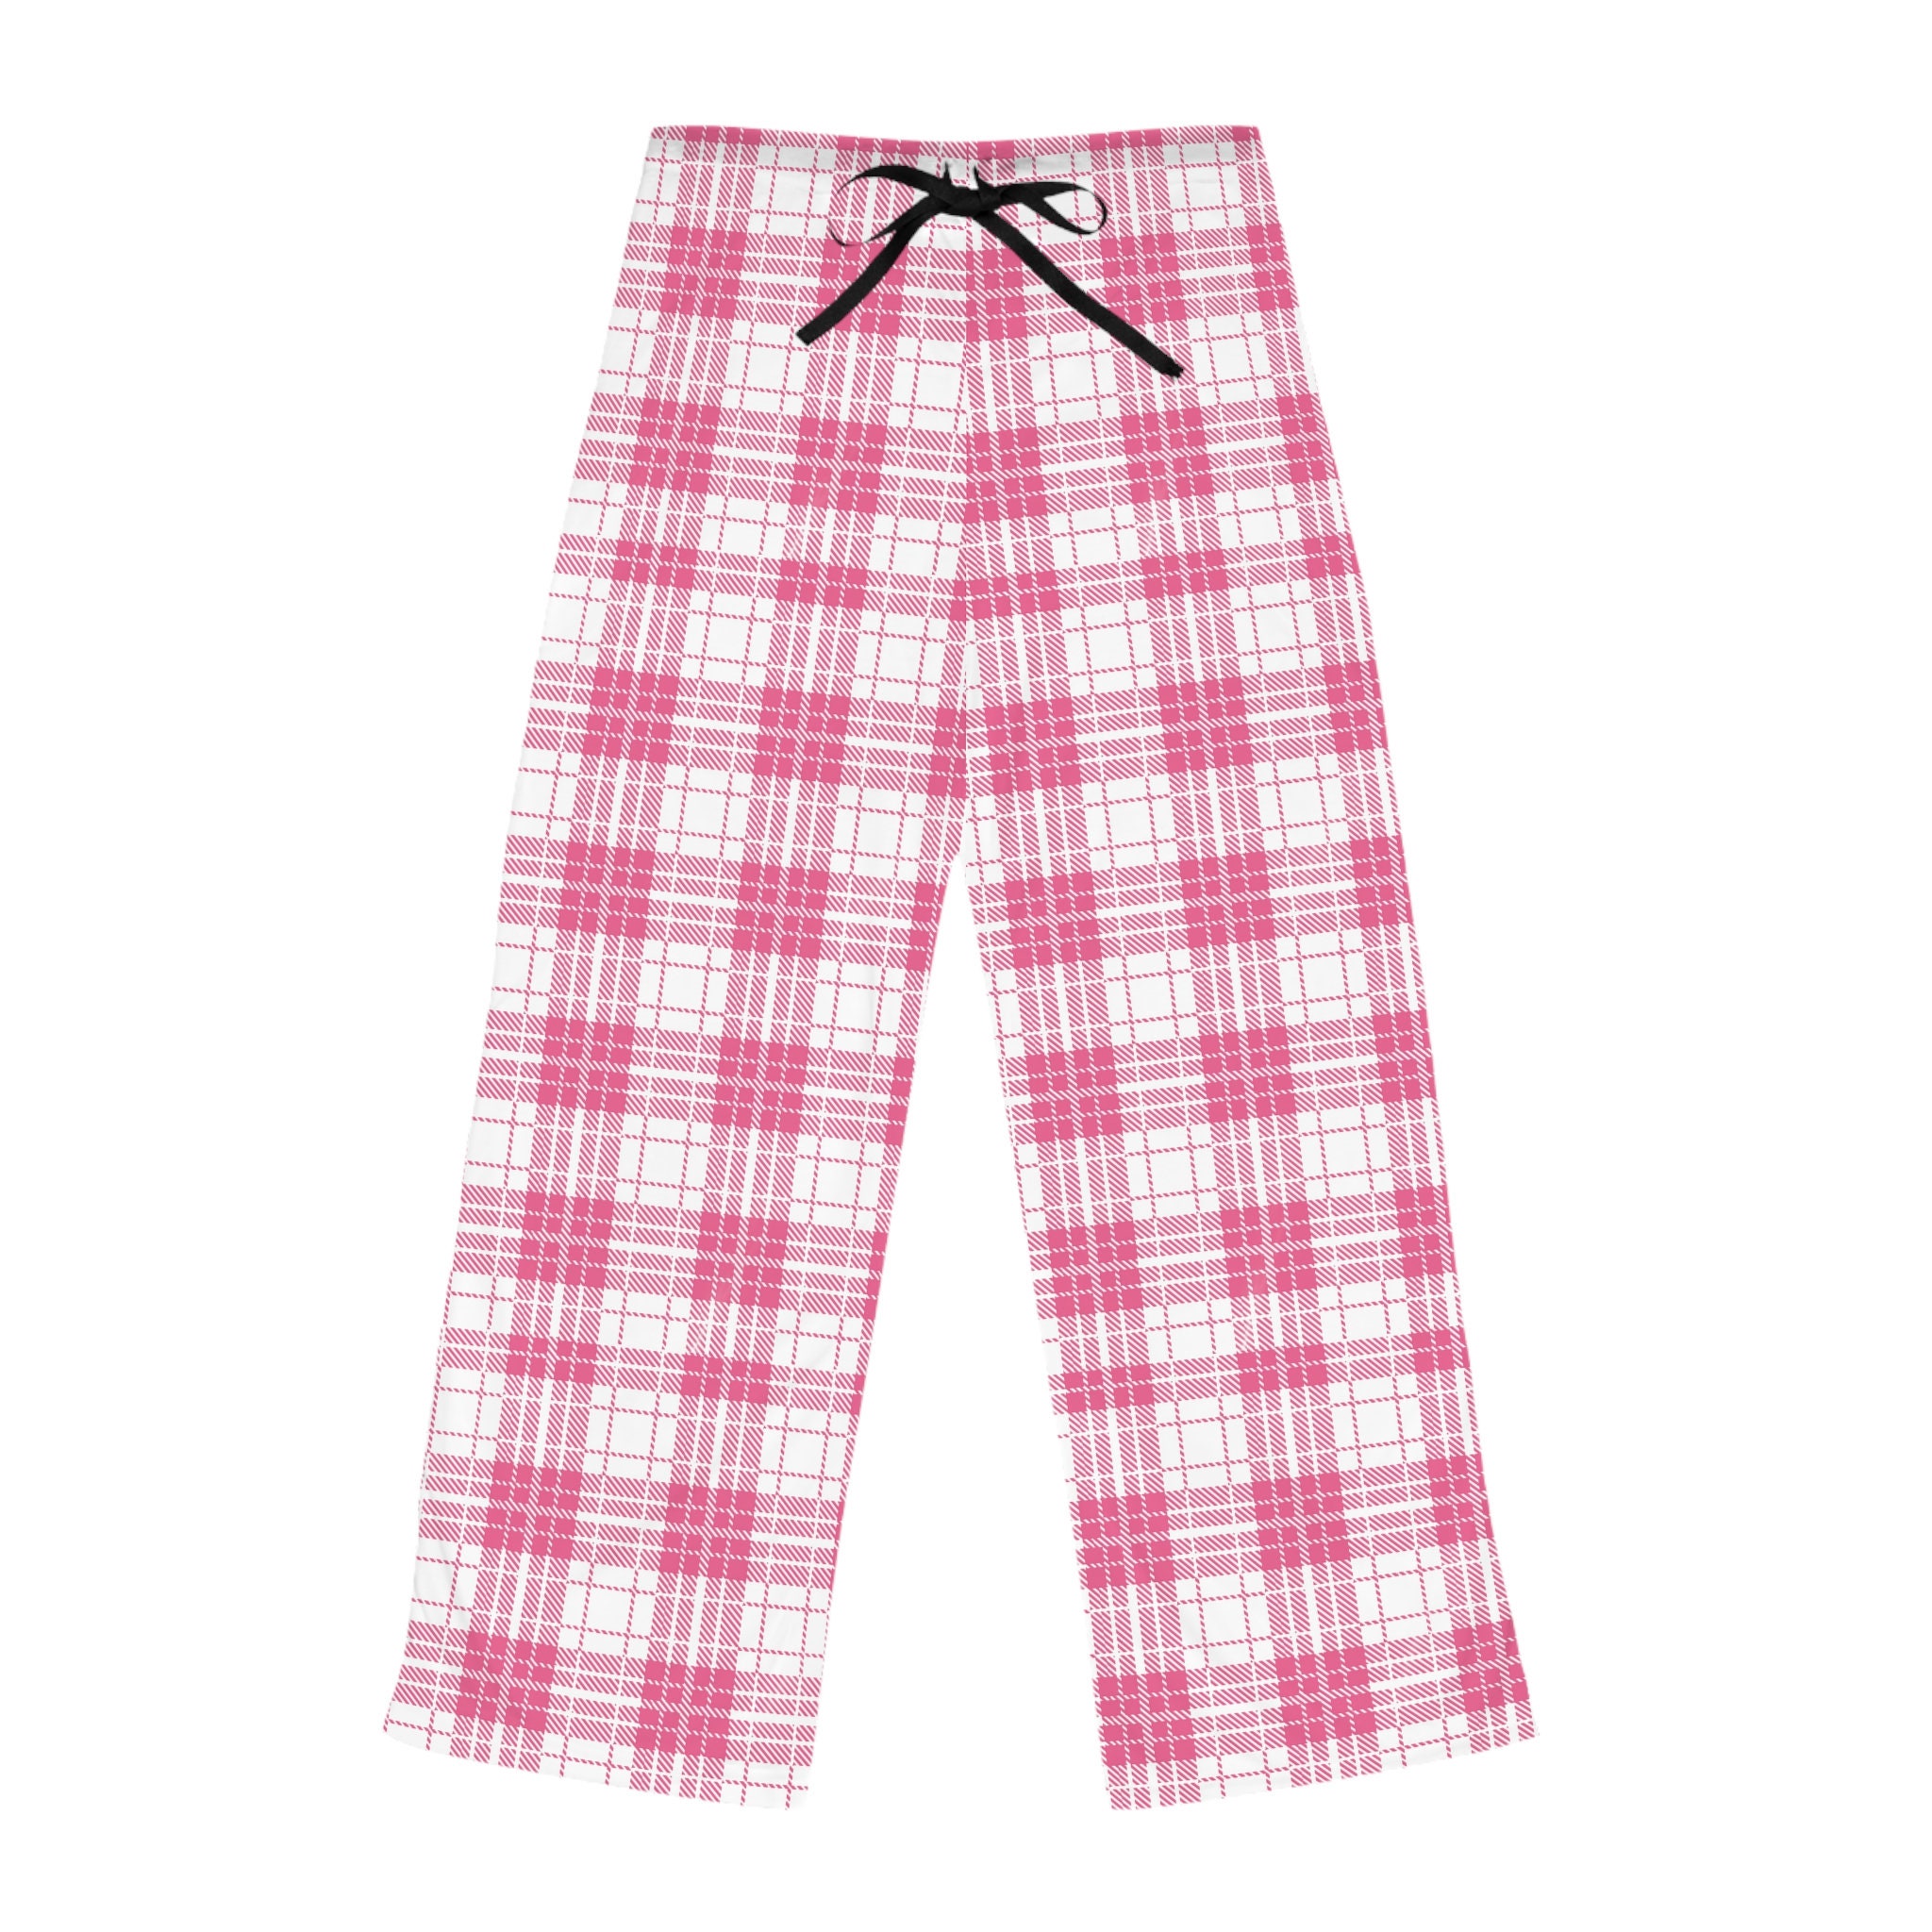 Valentine's Day Pink Plaid Pajama Pants for Women Gift for Her Valentine's  Day PJ Pants Plaid All Over Print in Pink Gift Idea 